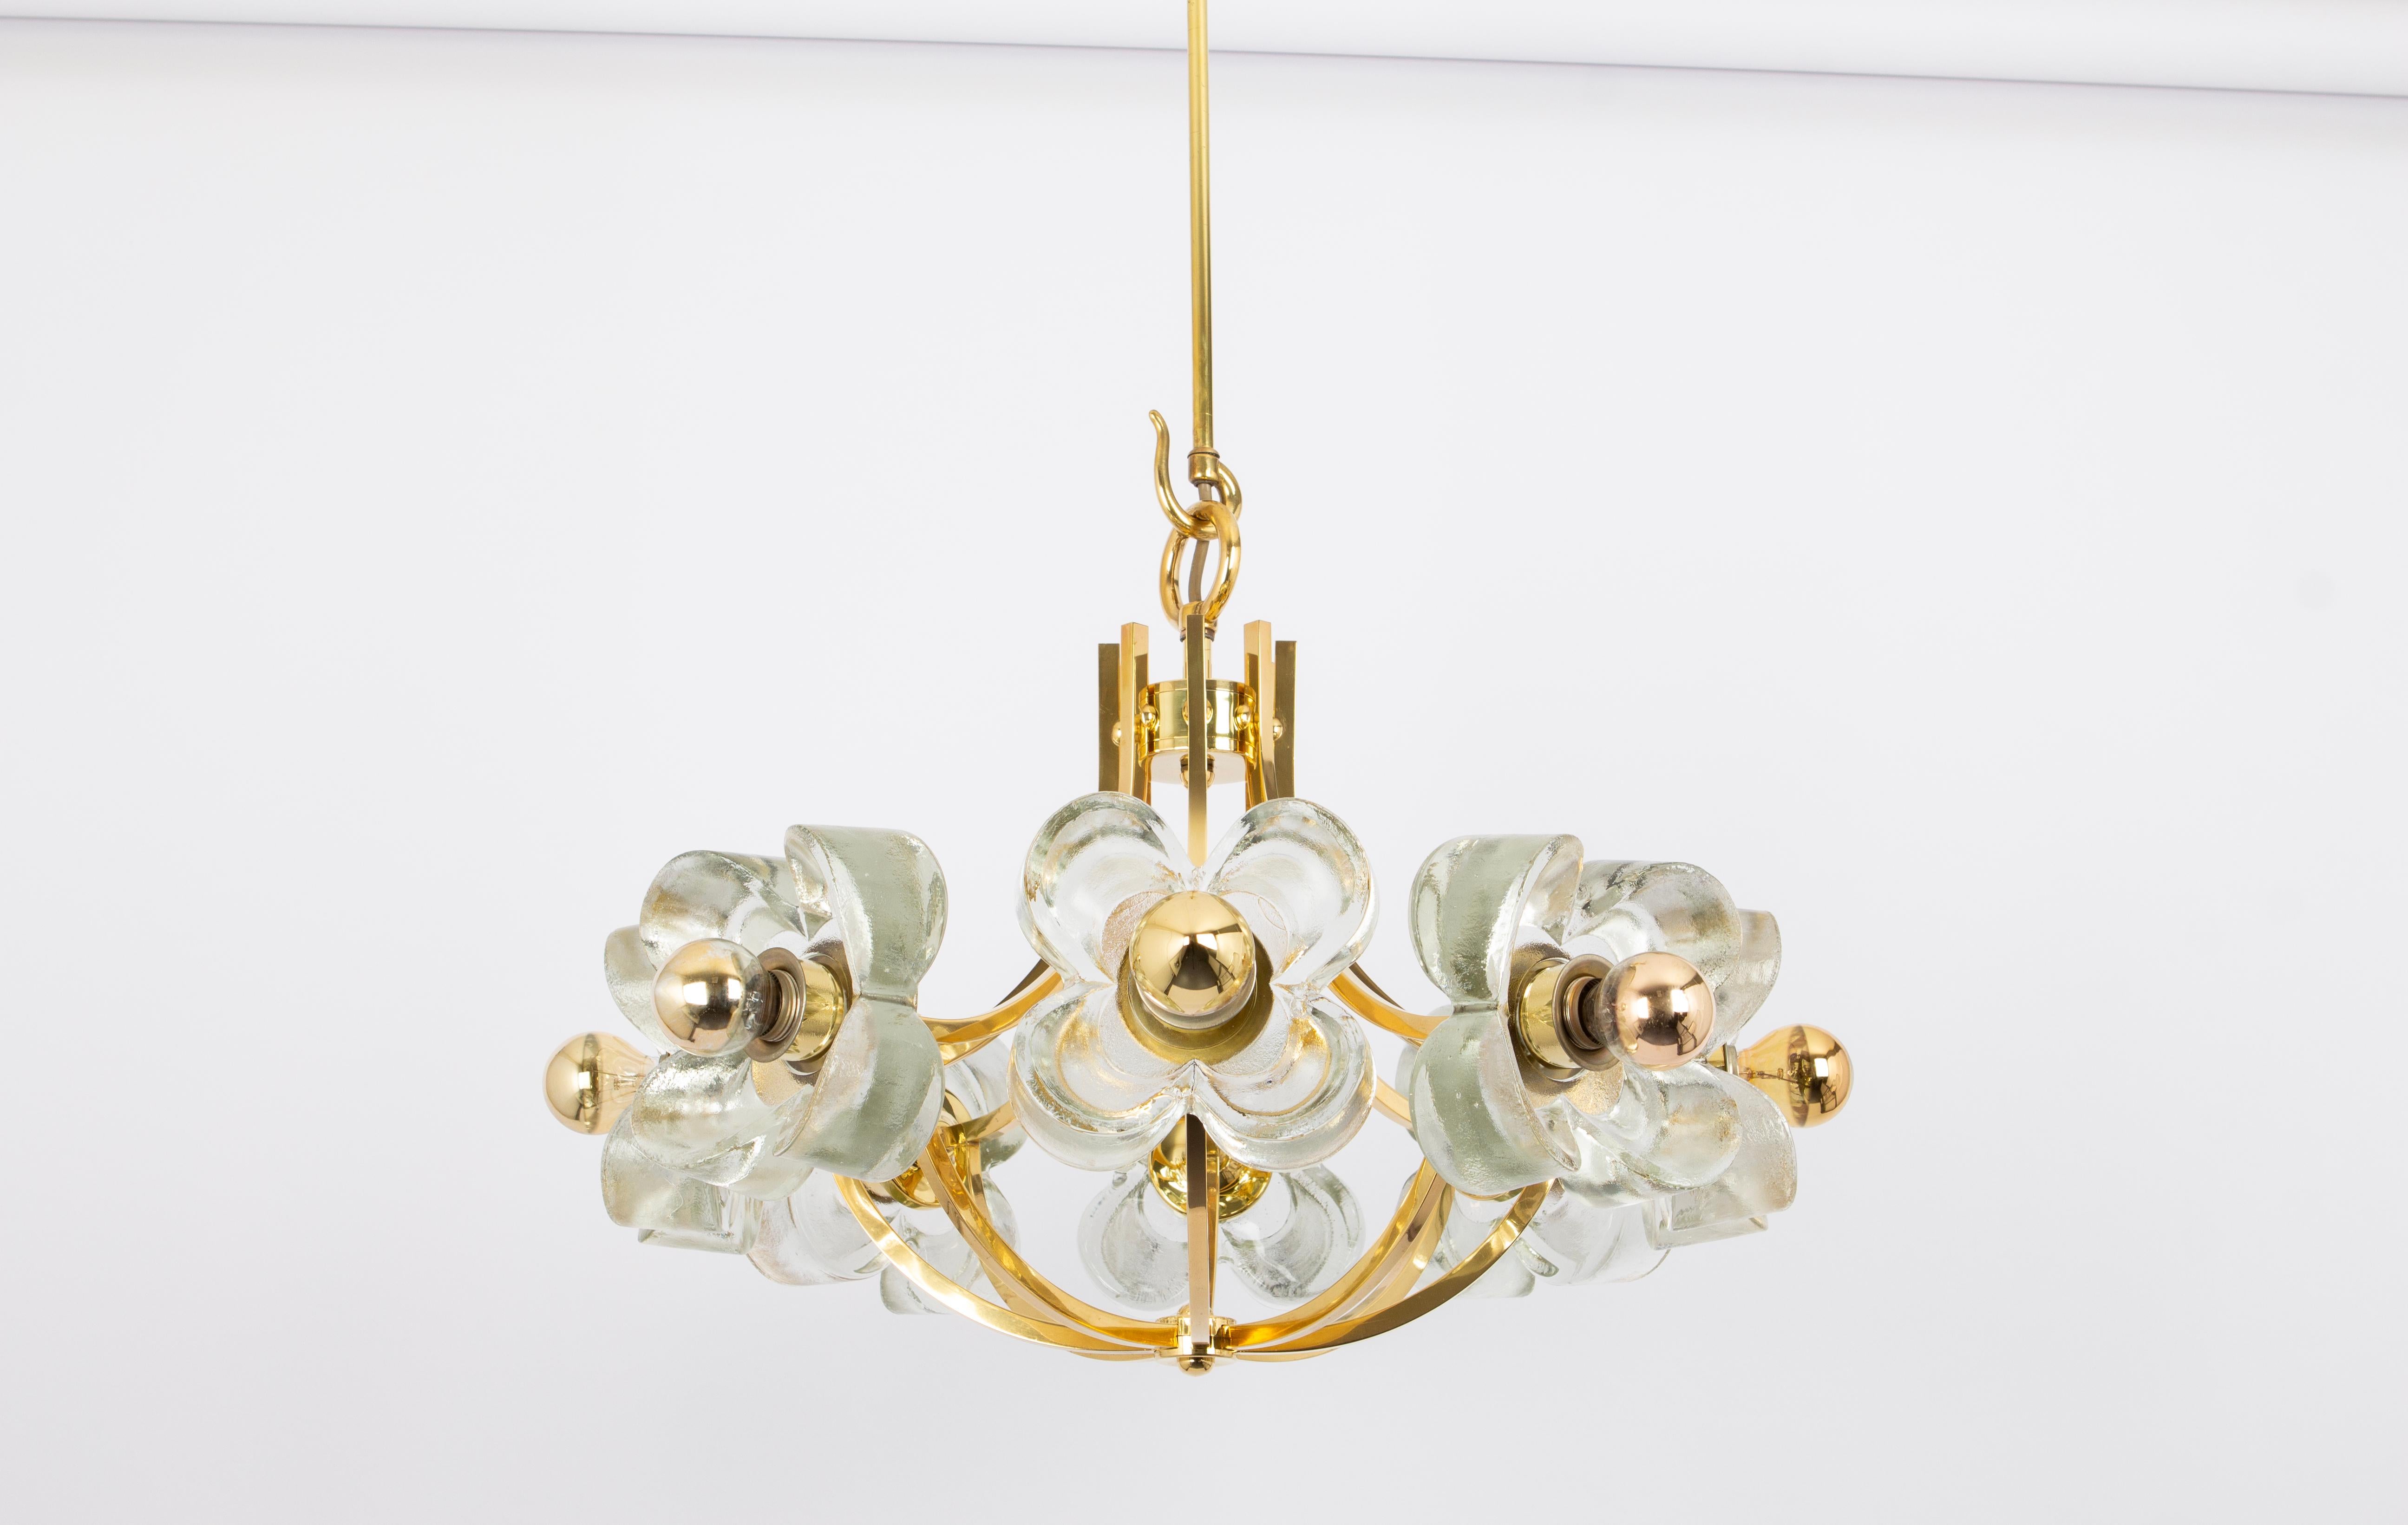 A wonderful large and high-quality gilded chandelier/pendant light fixture by Sische, Germany, 1970s

It is made of a brass frame decorated with 8 crystal glasses.
The lamp takes 8 small base bulbs (max. 40W per bulb).
Light bulbs are not included.